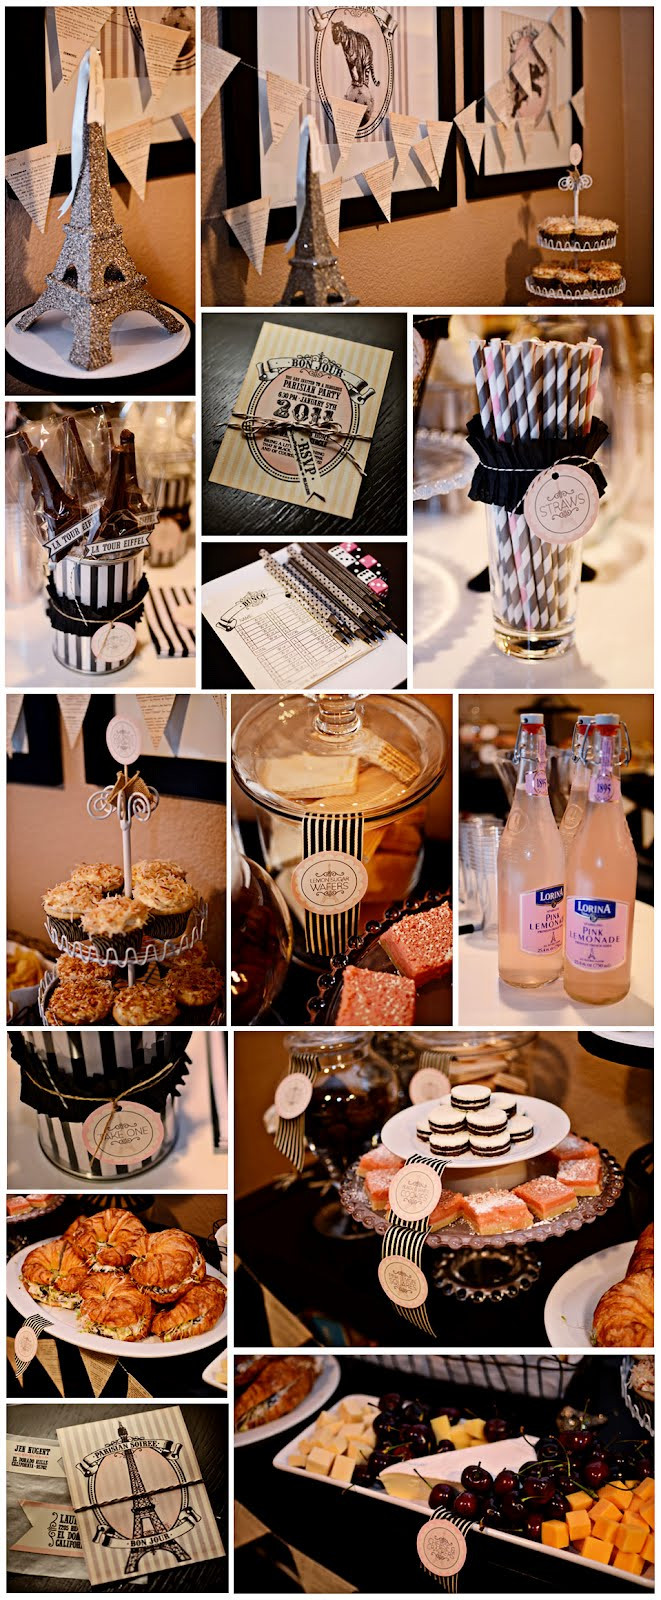 Paris Themed Party Food Ideas
 fort & field Paris themed birthday party